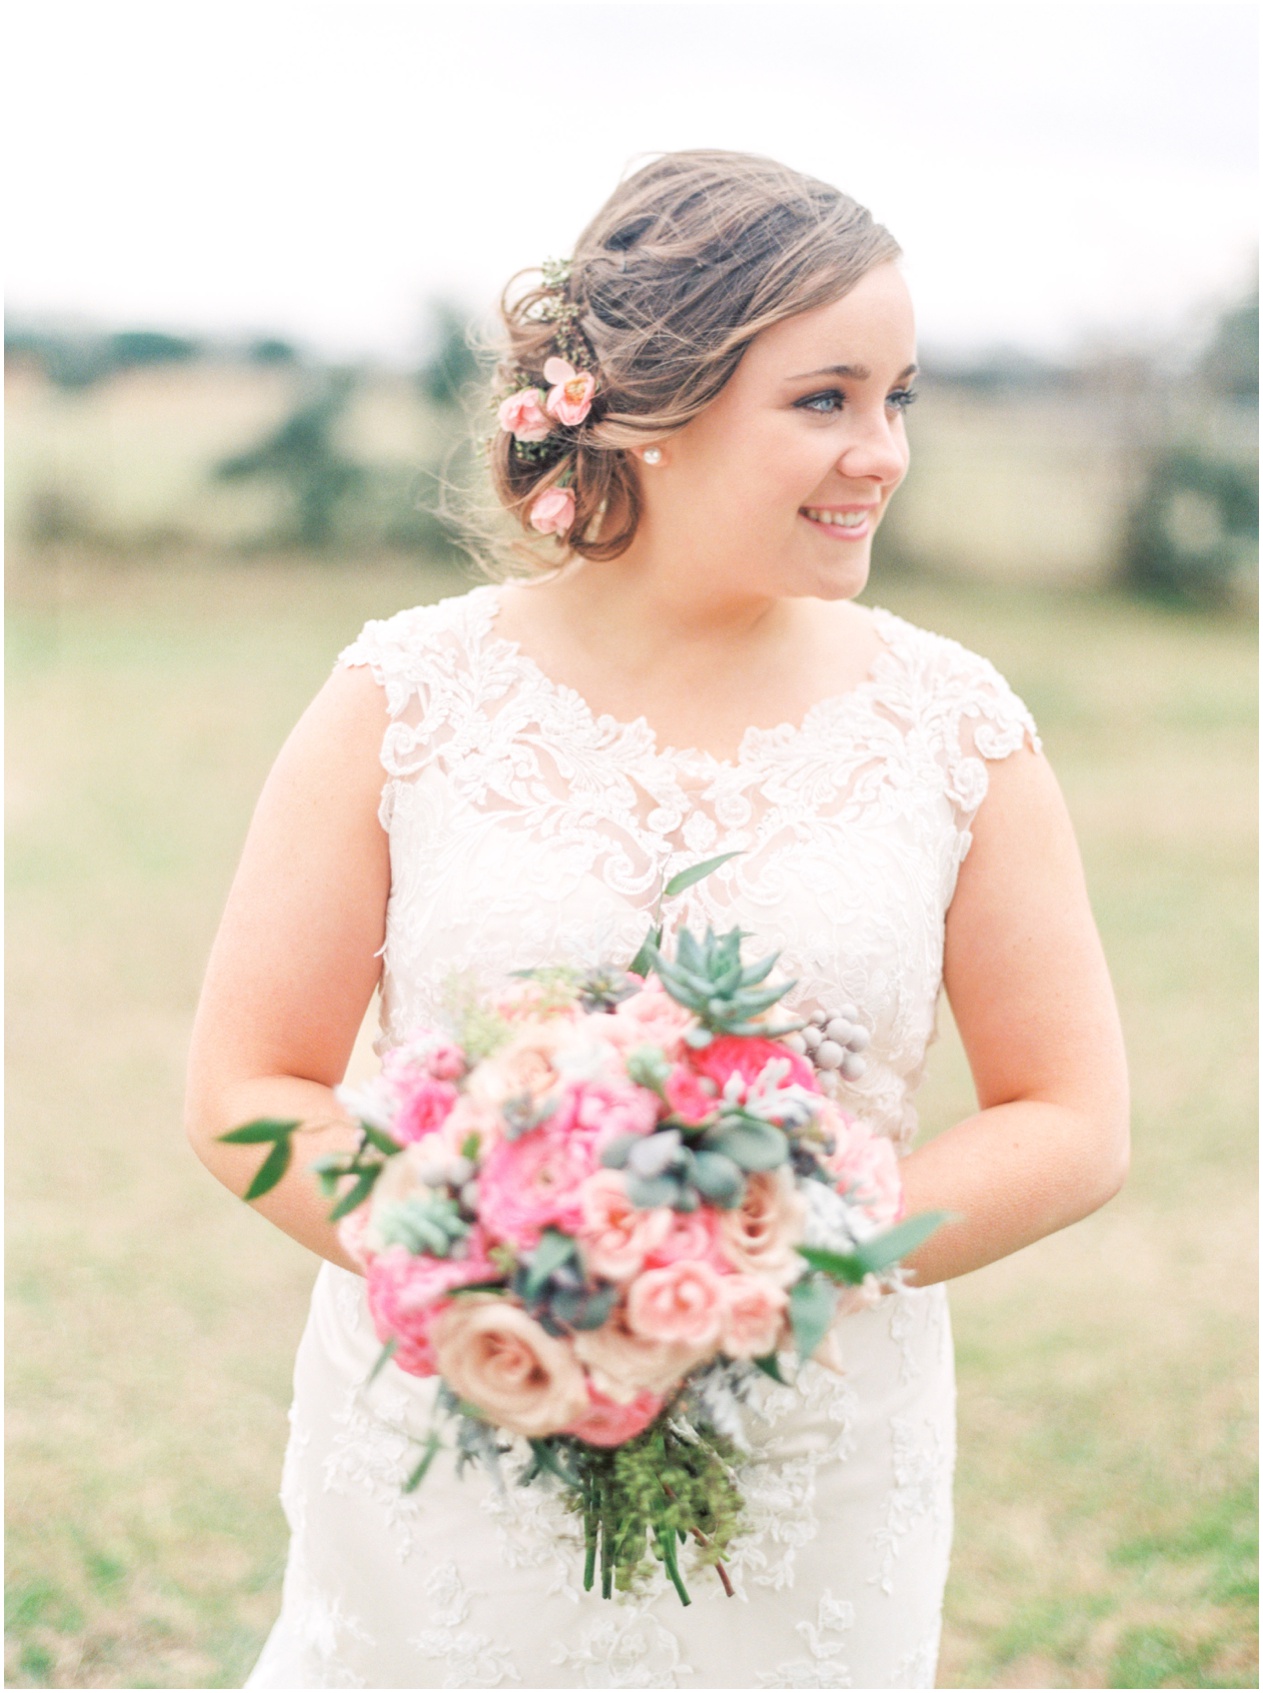 Sarah Best Photography - Claire's Bridals - The Amish Barn at Edge-28_STP.jpg